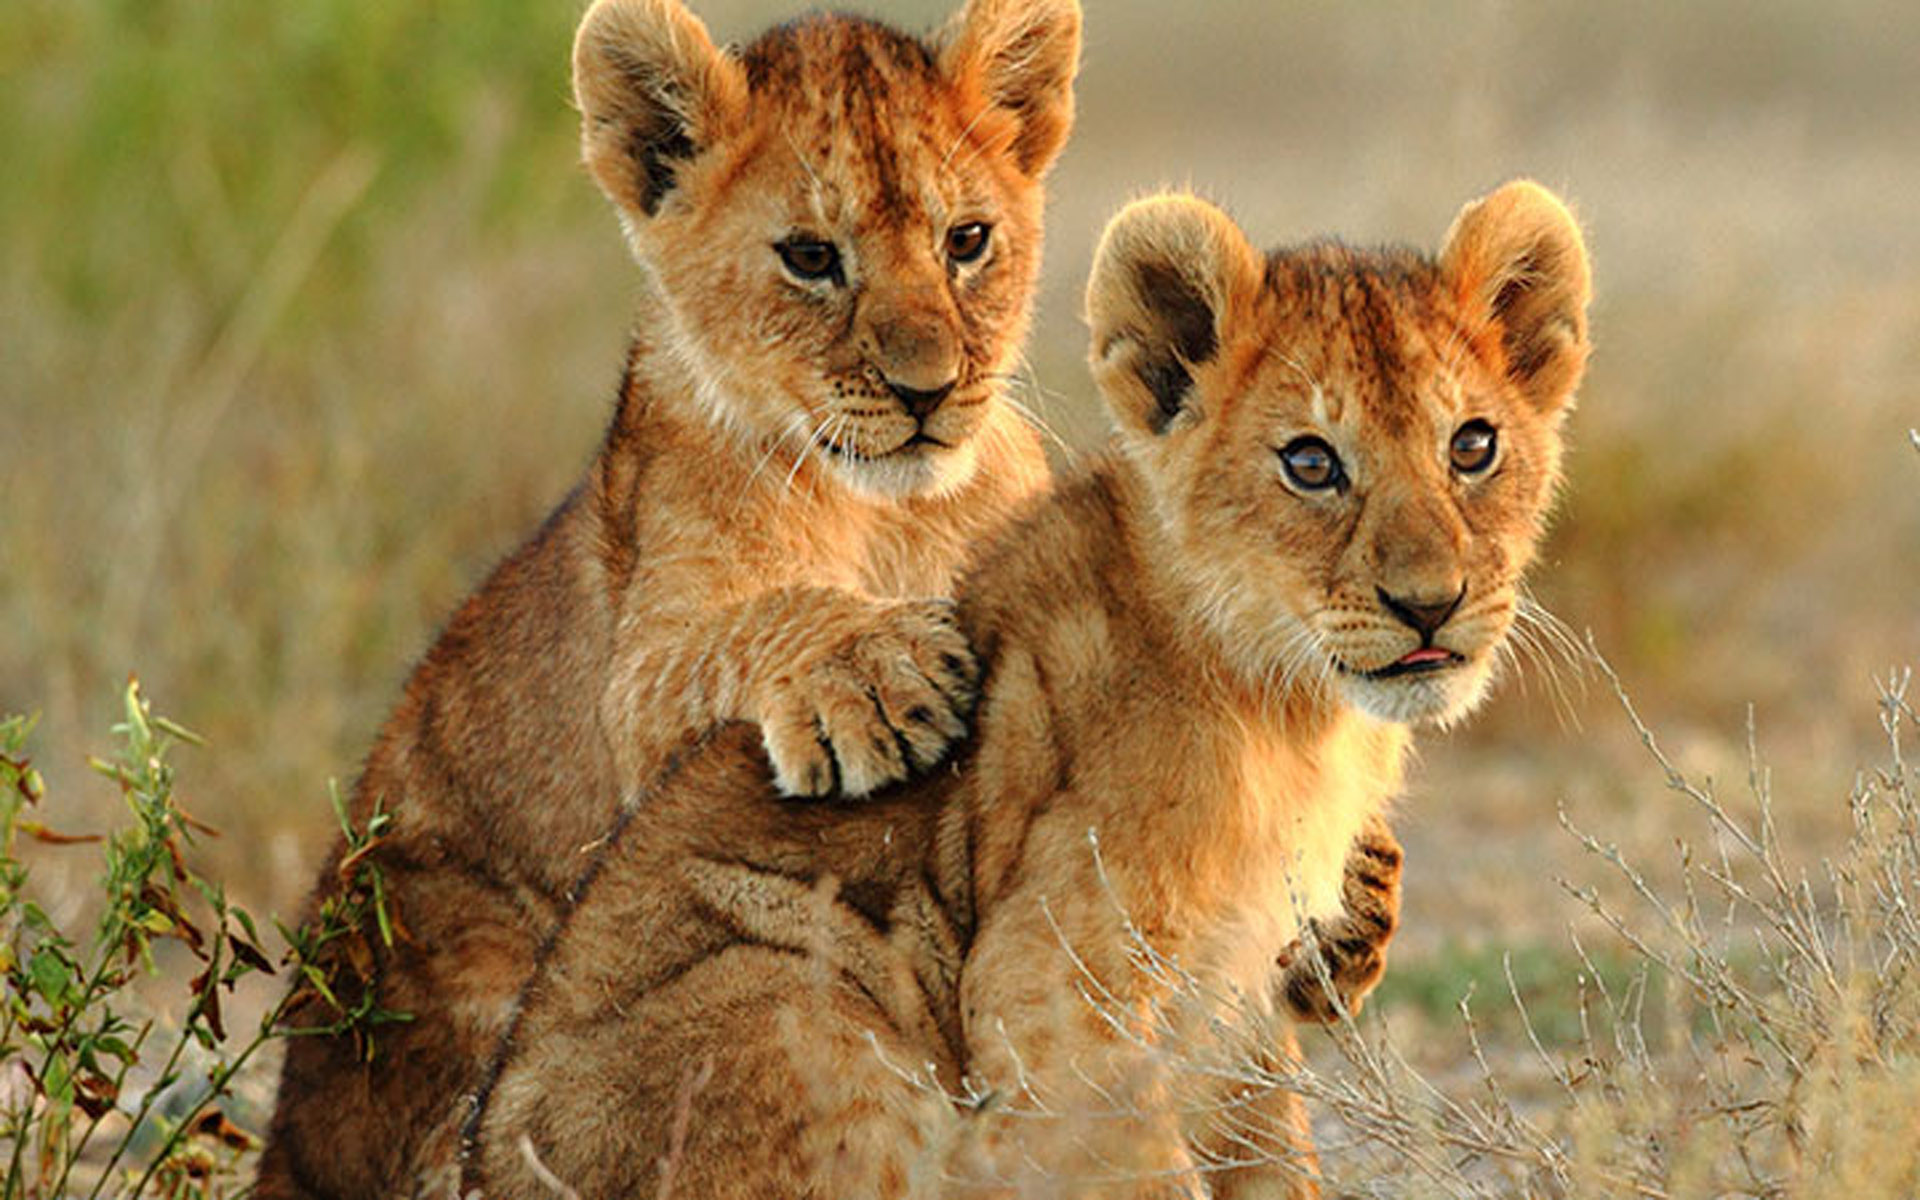 Two Small Lions Cubs HD Wallpaper For Laptop, Wallpaper13.com